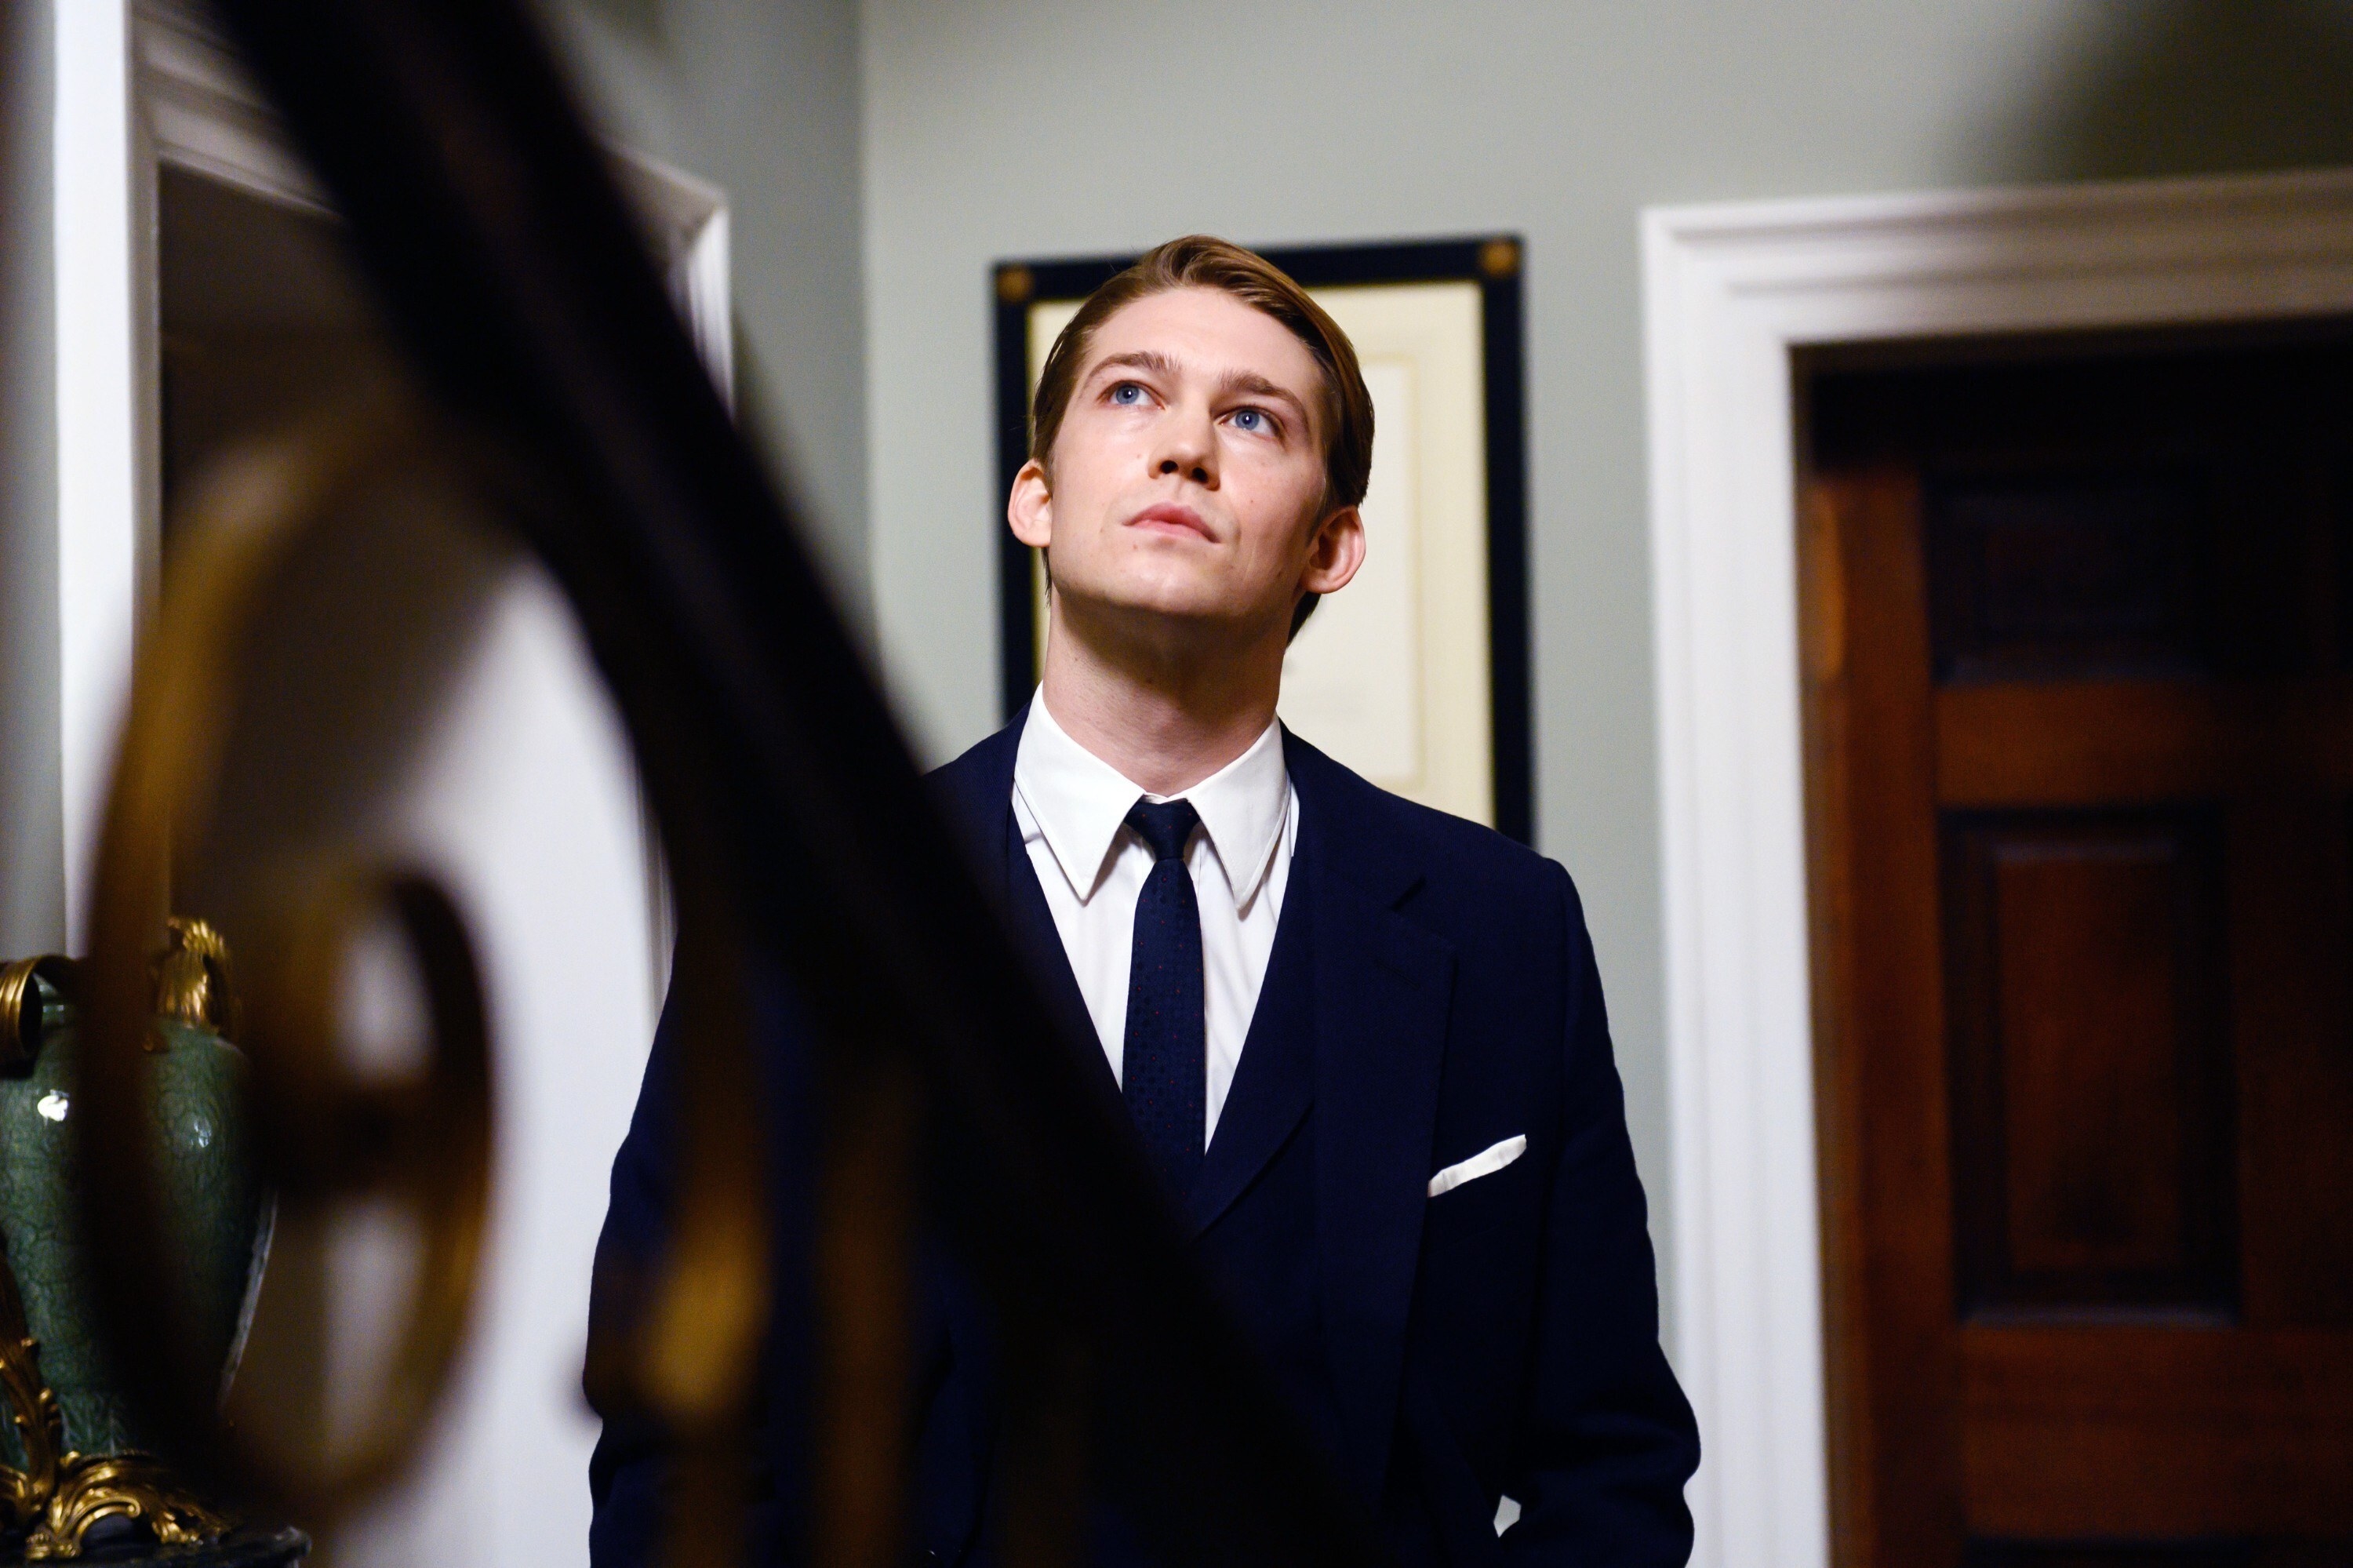 Joe Alwyn in a suit and tie looking up the stairs